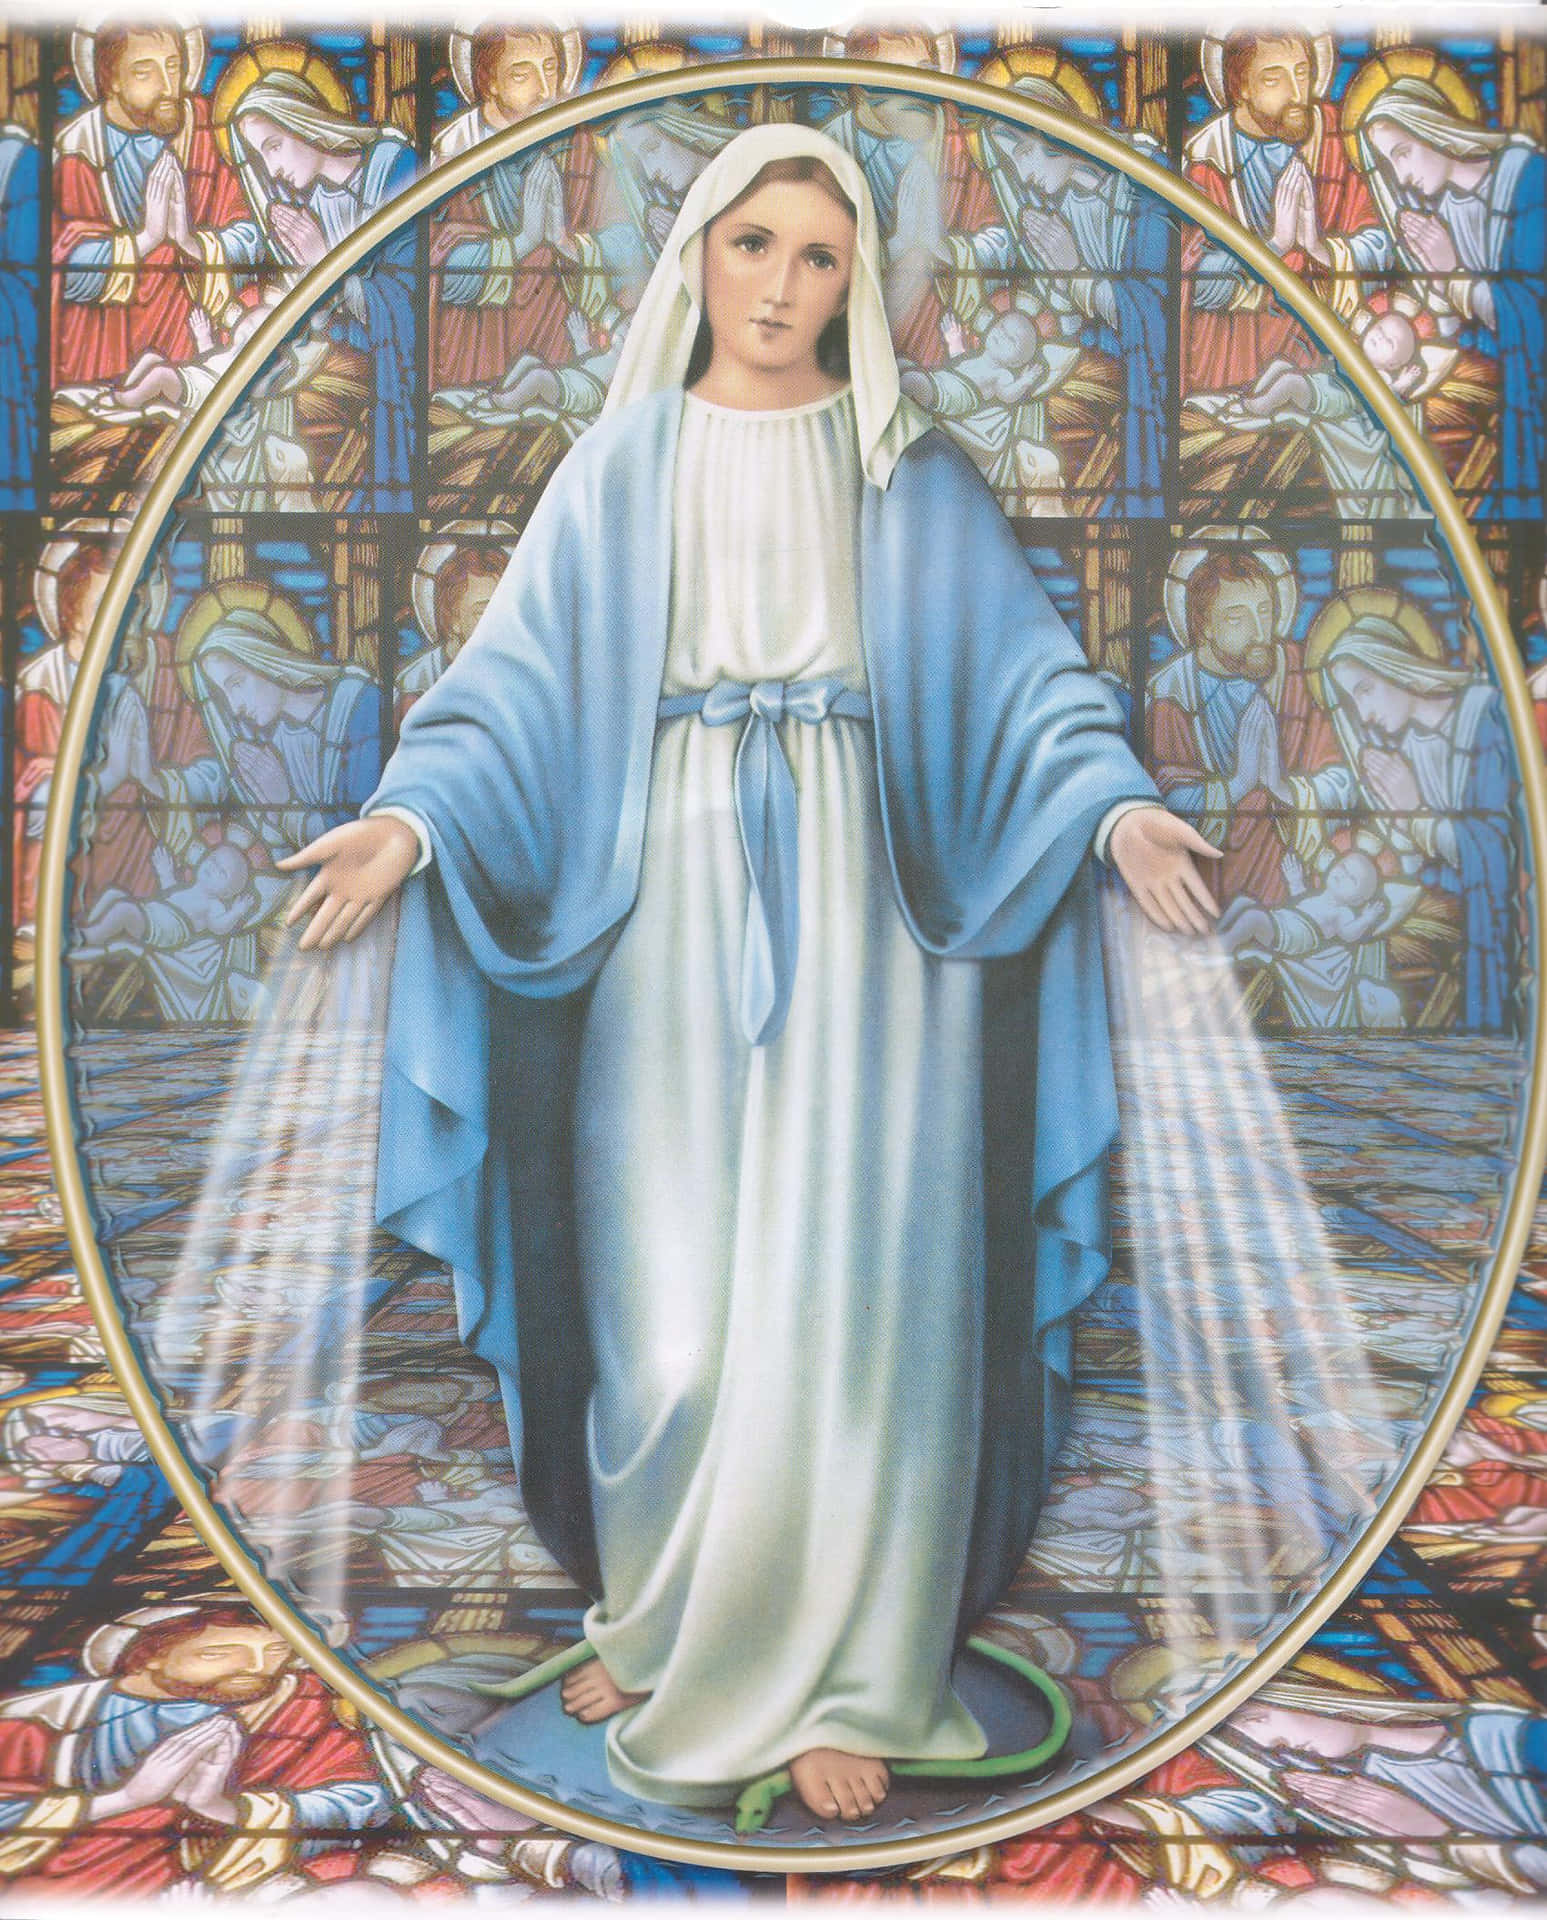 Mother Mary stands tall with a peaceful expression.